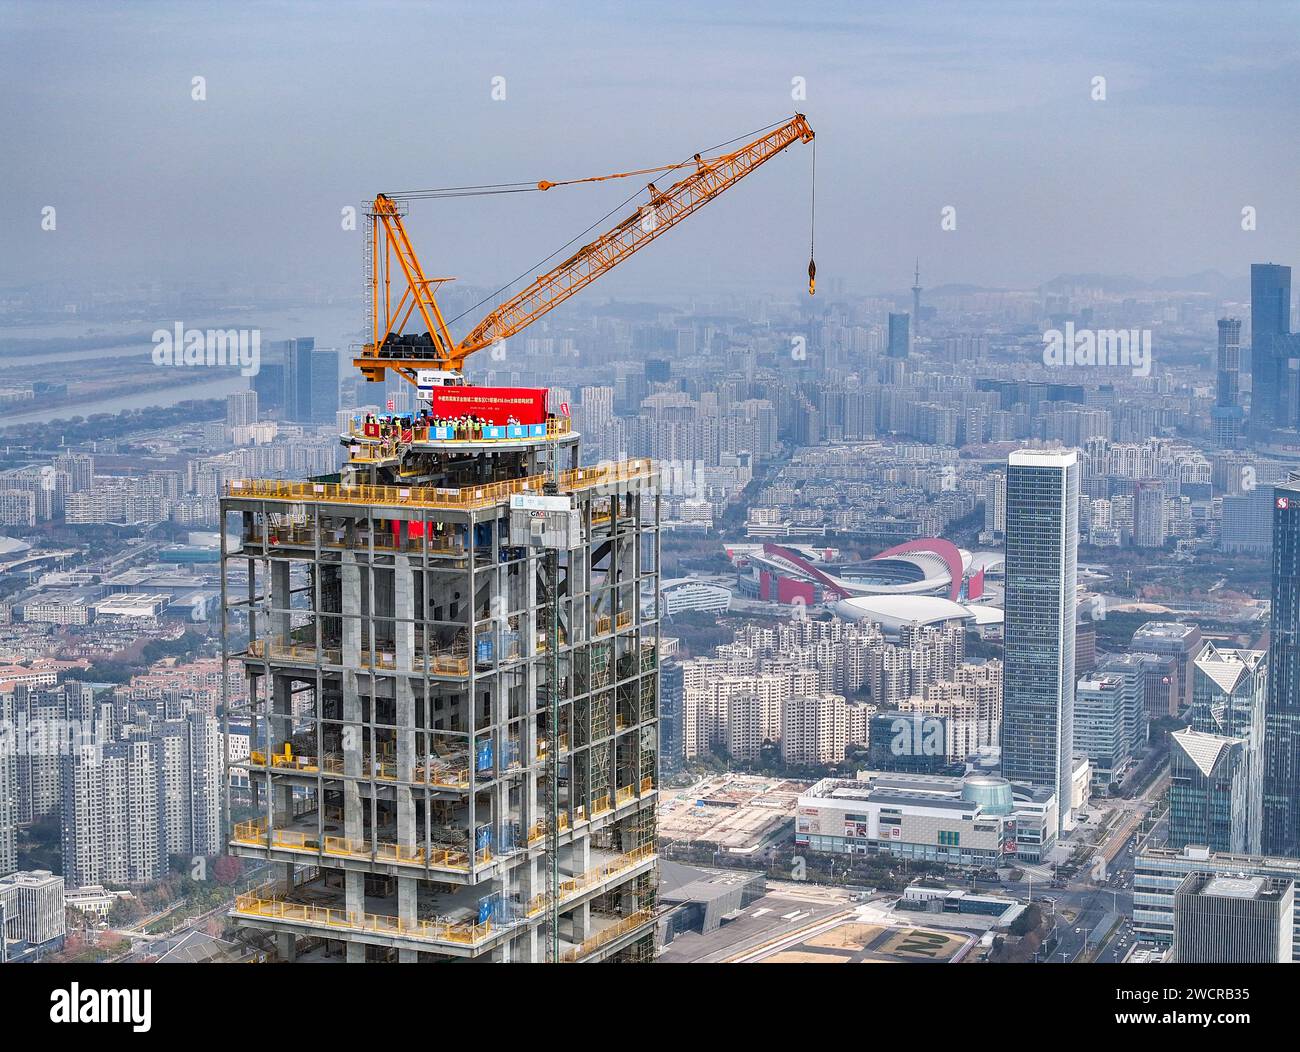 Beijing China 16th Jan 2024 An Aerial Drone Photo Taken On Jan 16 2024 Shows The Construction Site Of The Second Phase Project East Section Of The Nanjing Financial City In Nanjing East Chinas Jiangsu Province The Main Structure Of The Second Phase Project East Section Of The Nanjing Financial City Was Capped On Tuesday With A Gross Floor Area Of Around 429000 Square Meters The Project Is Designed As An Architectural Complex Comprising Officing Hospitality Housing And Commercial Facilities Credit Li Boxinhuaalamy Live News 2WCRB35 